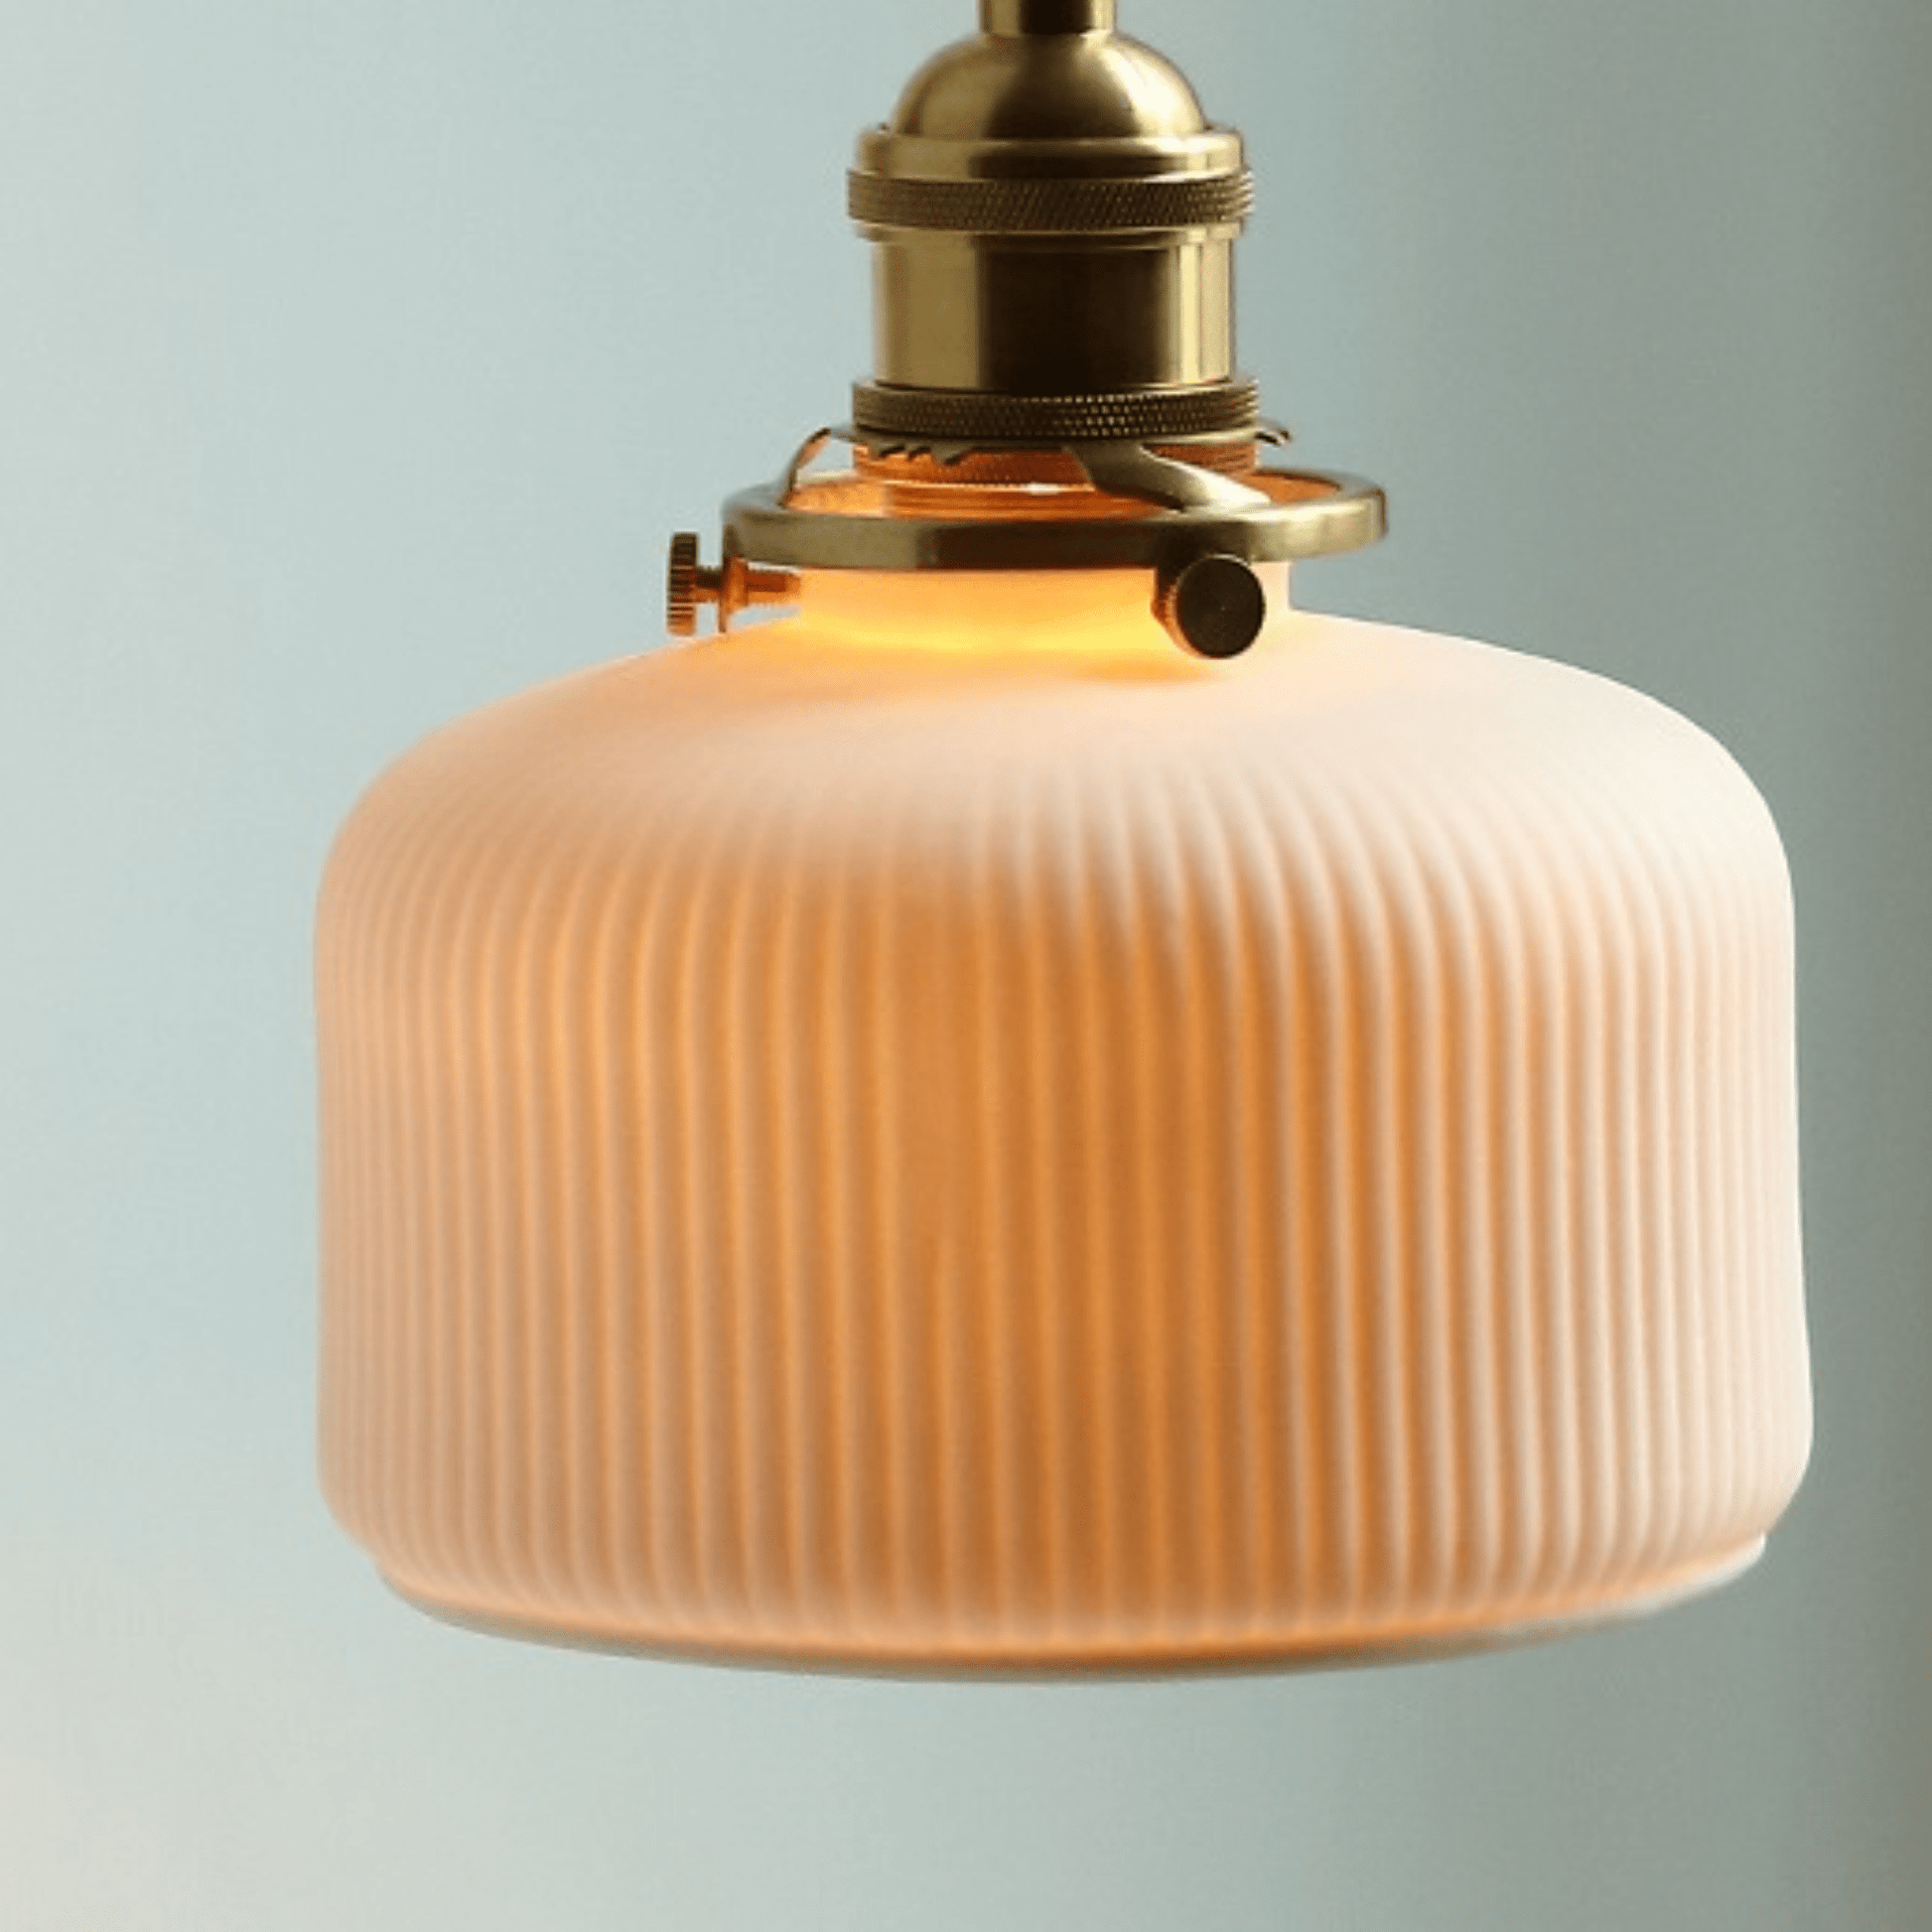 White Ceramic Wall Sconce with Pull Chain Switch Lighting Decluttered Homes